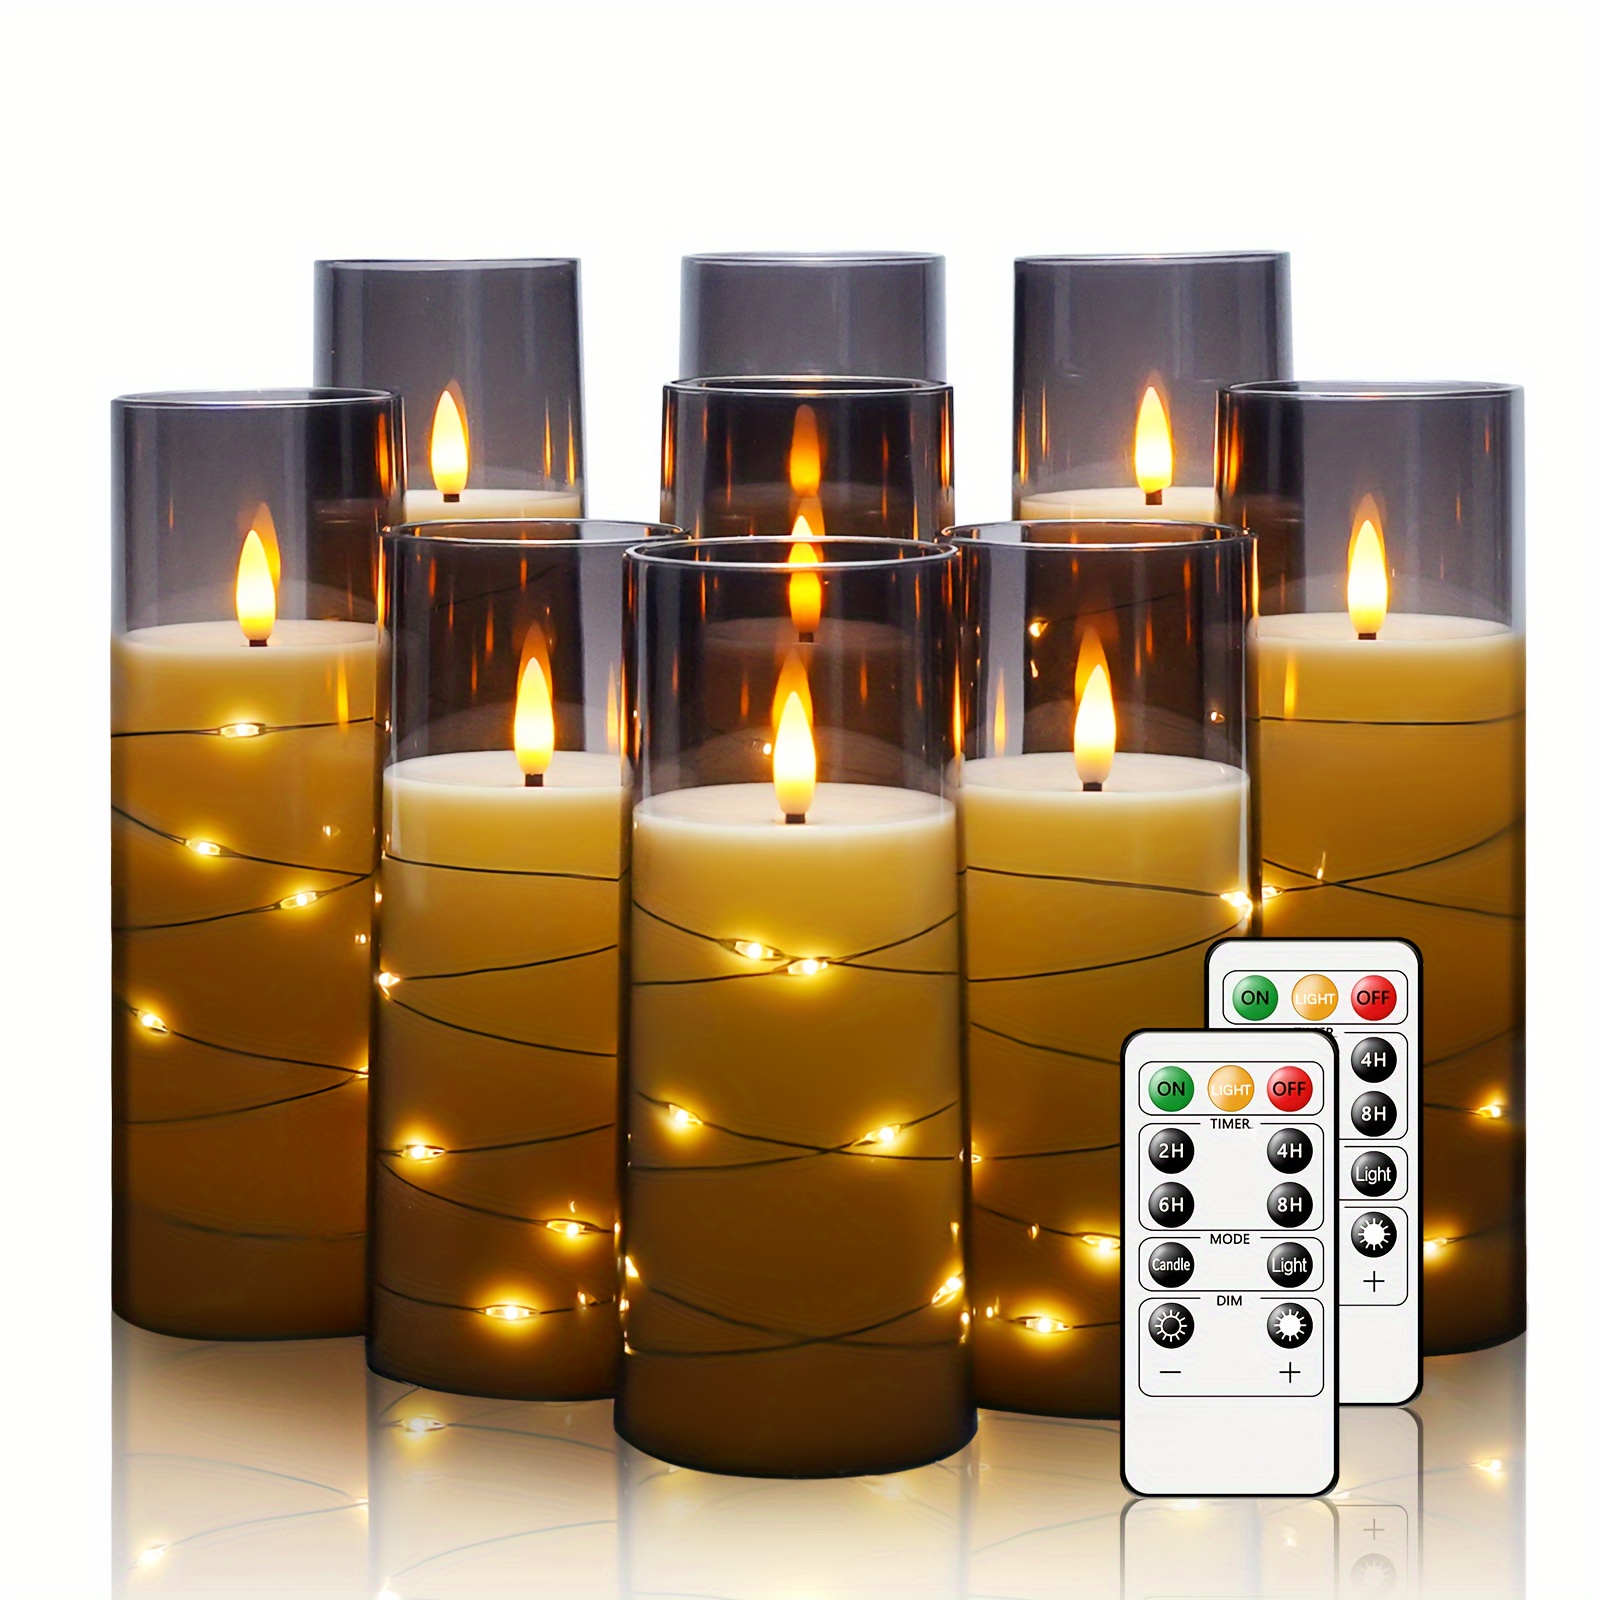 

Flickering Flameless Led Candles, Battery Operated Candles 9 Pcs With Embedded Star String, Acrylic Led Pillar Candles With Remote, Suitable For Home Decoration To Create An Atmosphere